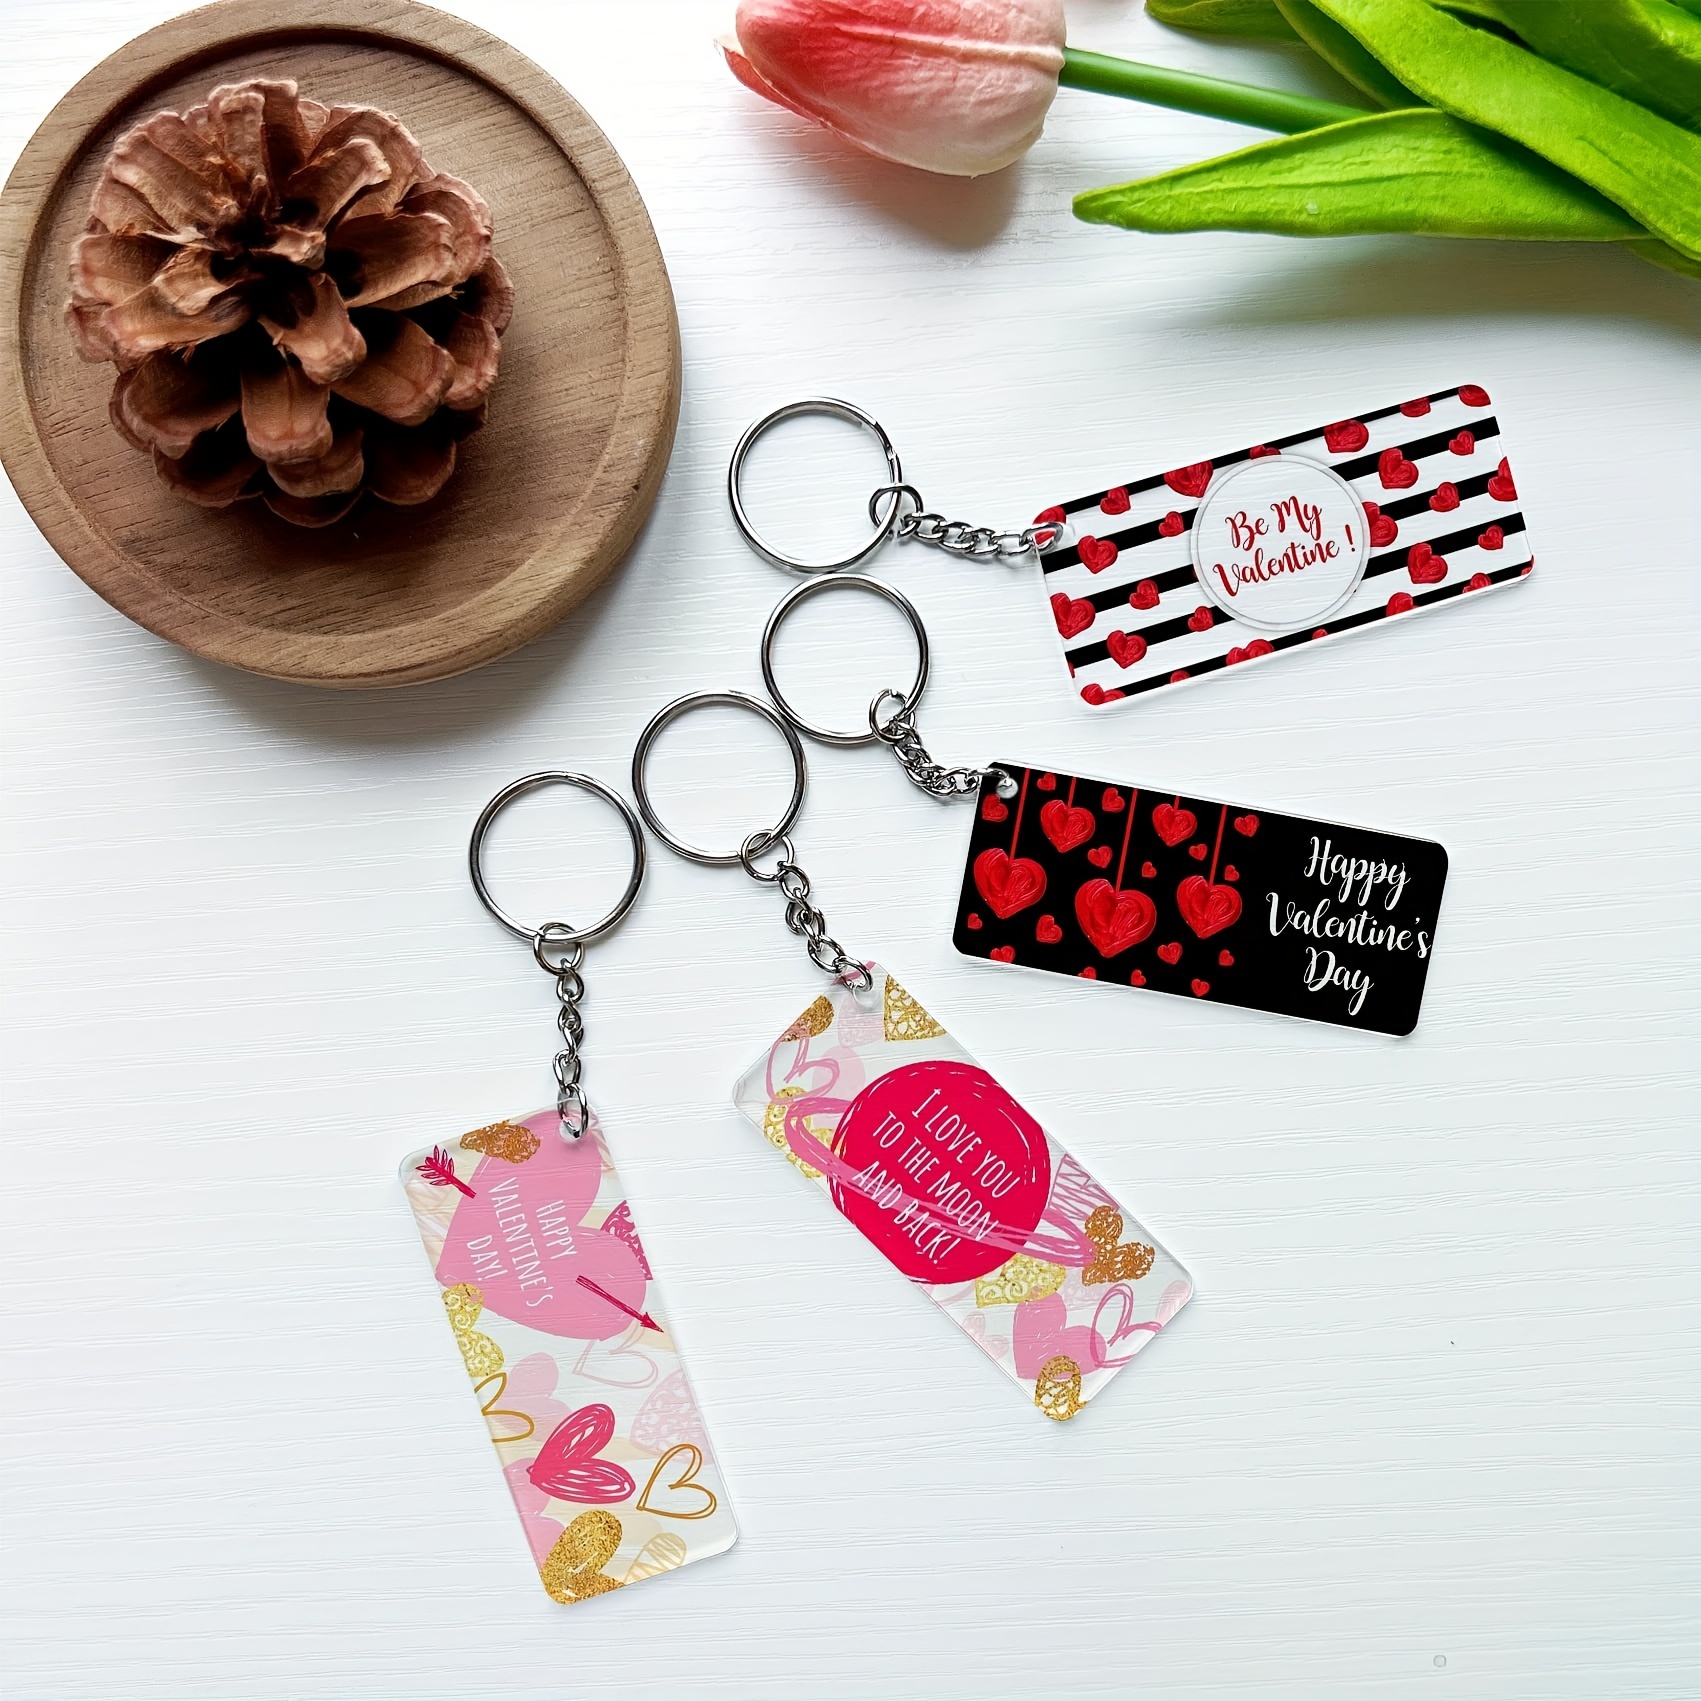 120PCS Sublimation Keychain Rectangle DIY Blanks Set With Tassel Key Chain  Metal Key Rings For Homemade Crafts Accessories